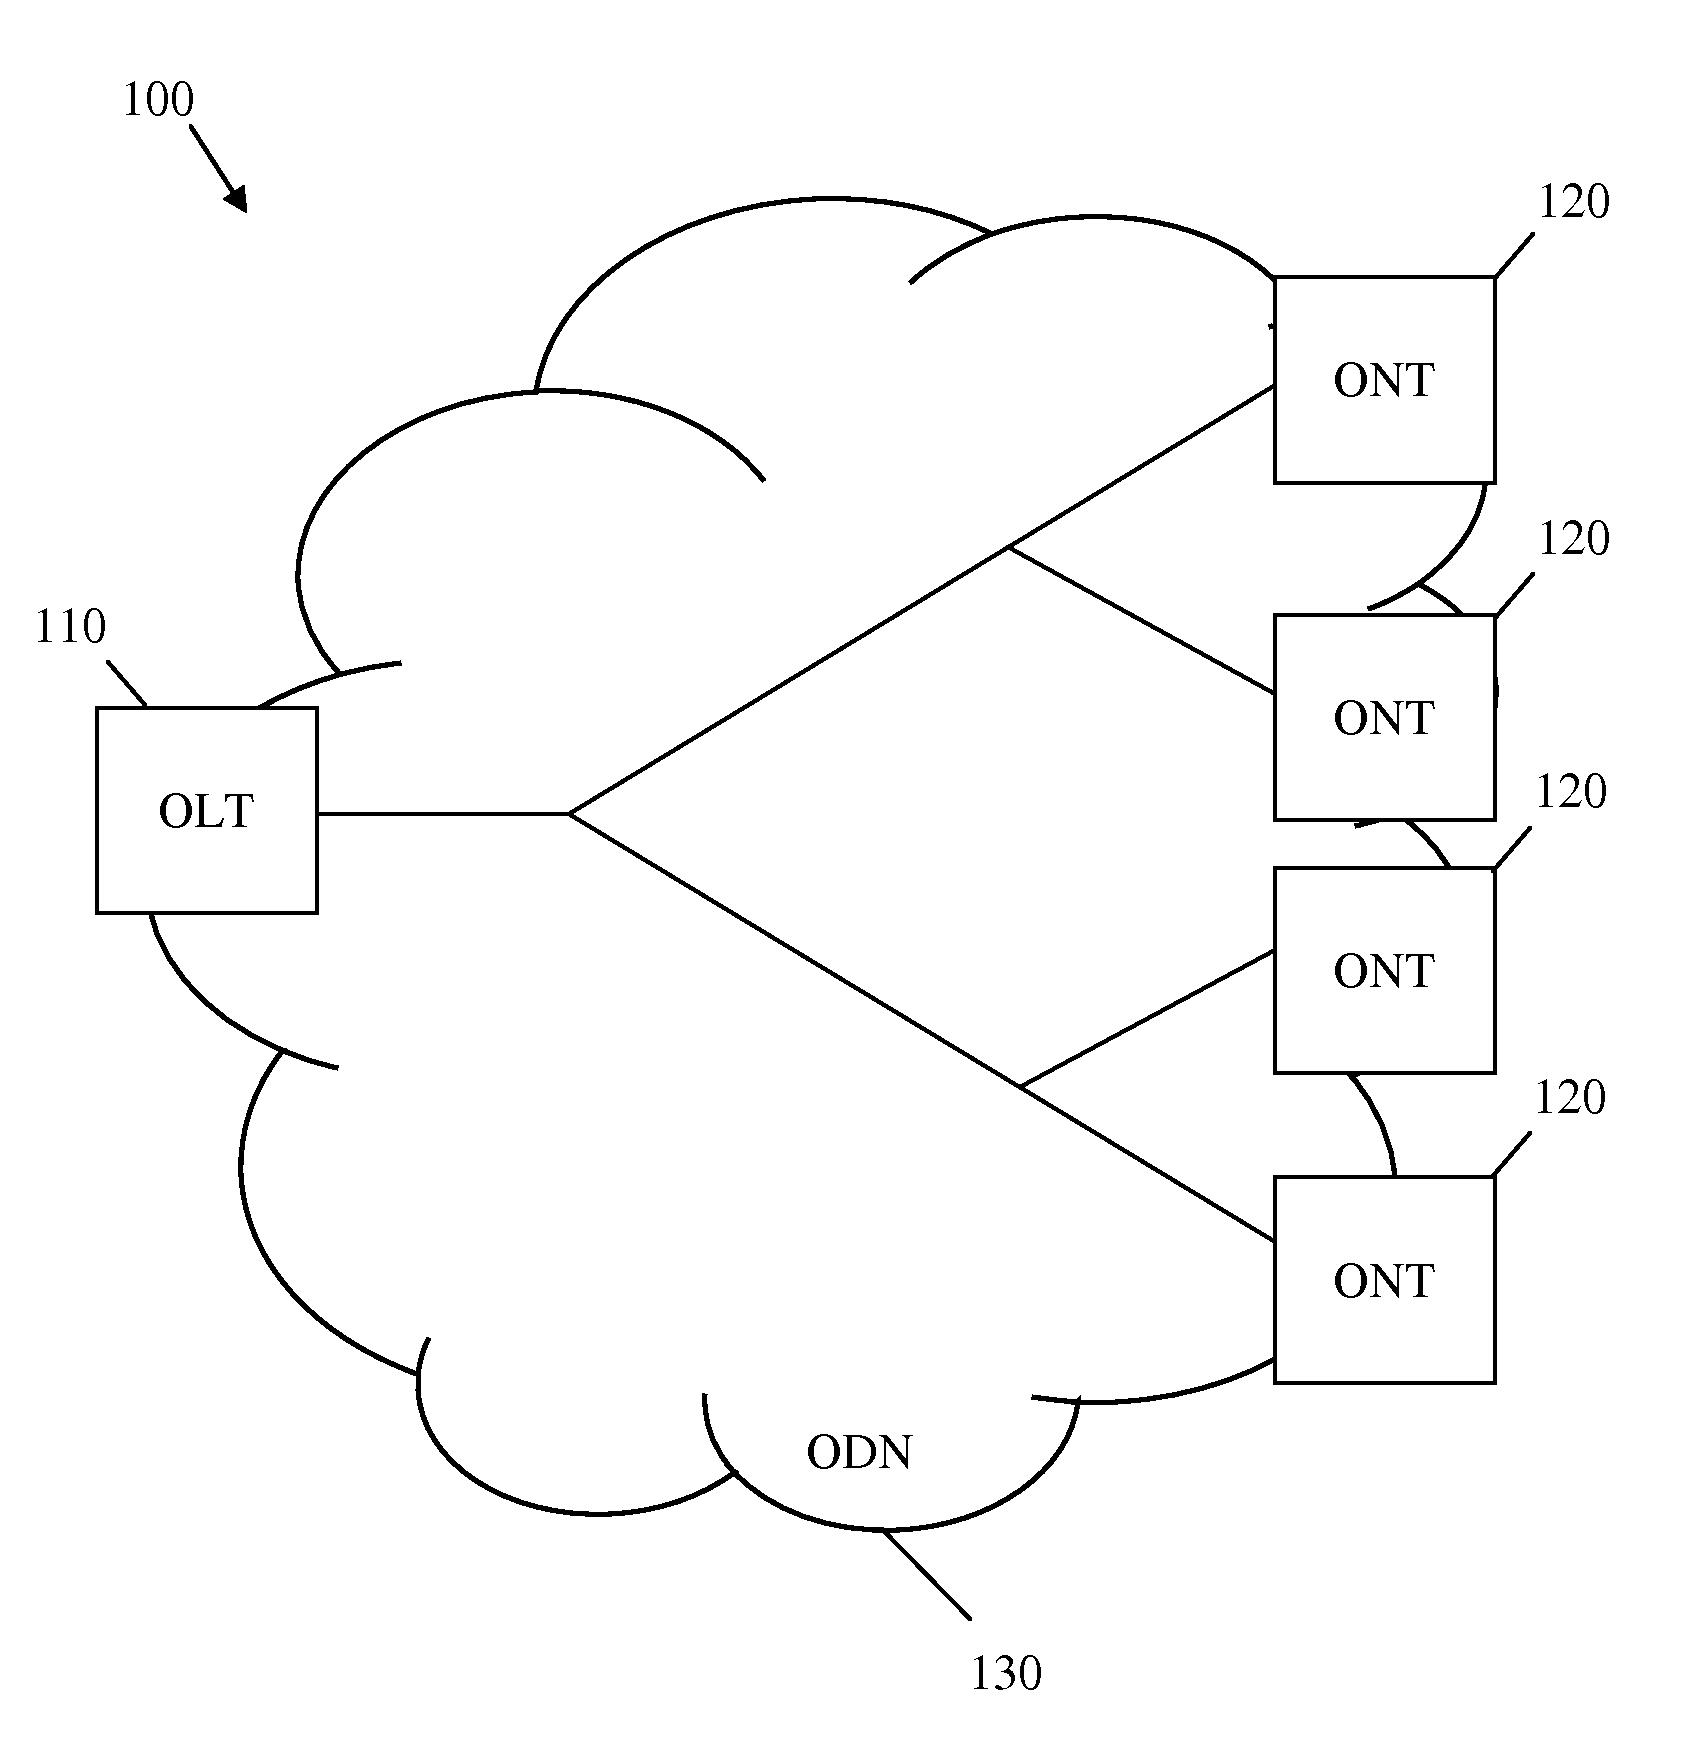 Wavelength Stabilization and Locking for Colorless Dense Wavelength Division Multiplexing Transmitters